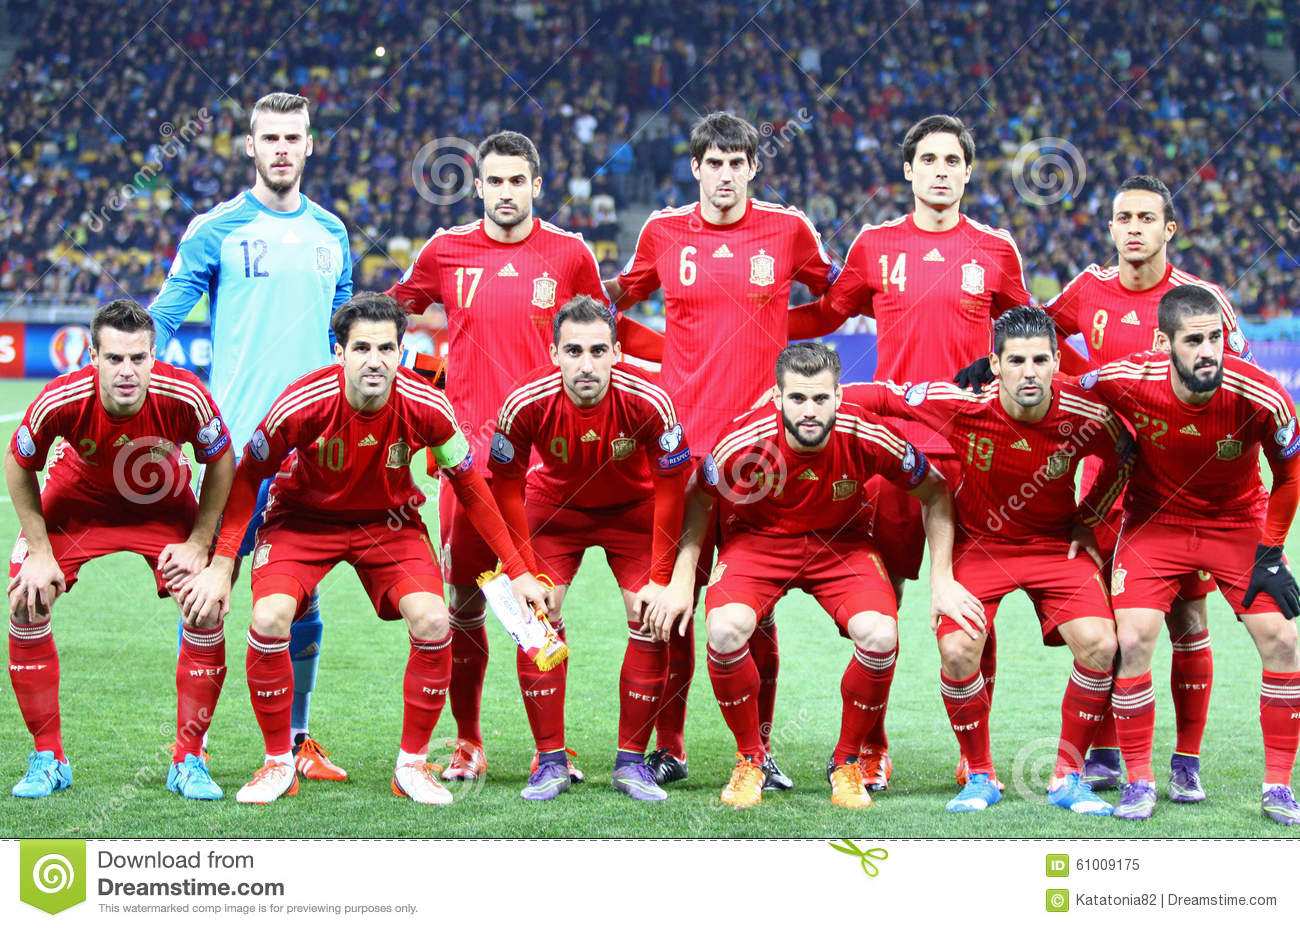 Spain National Football Team Backgrounds, Compatible - PC, Mobile, Gadgets| 1300x928 px